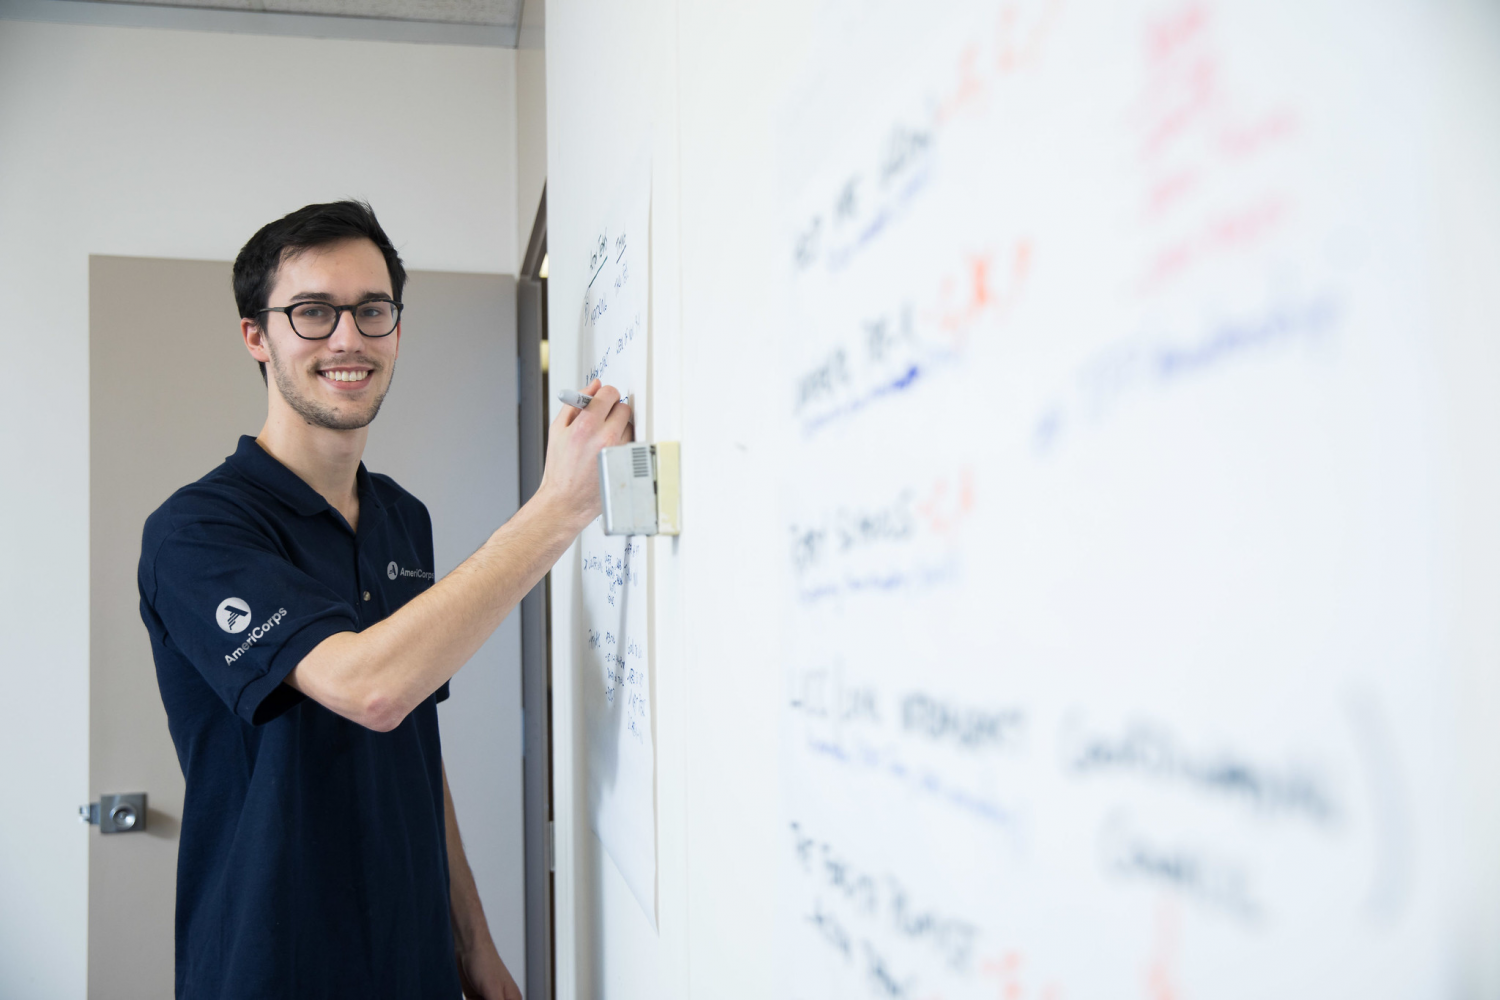 Man in an AmeriCorps stands by a whiteboard